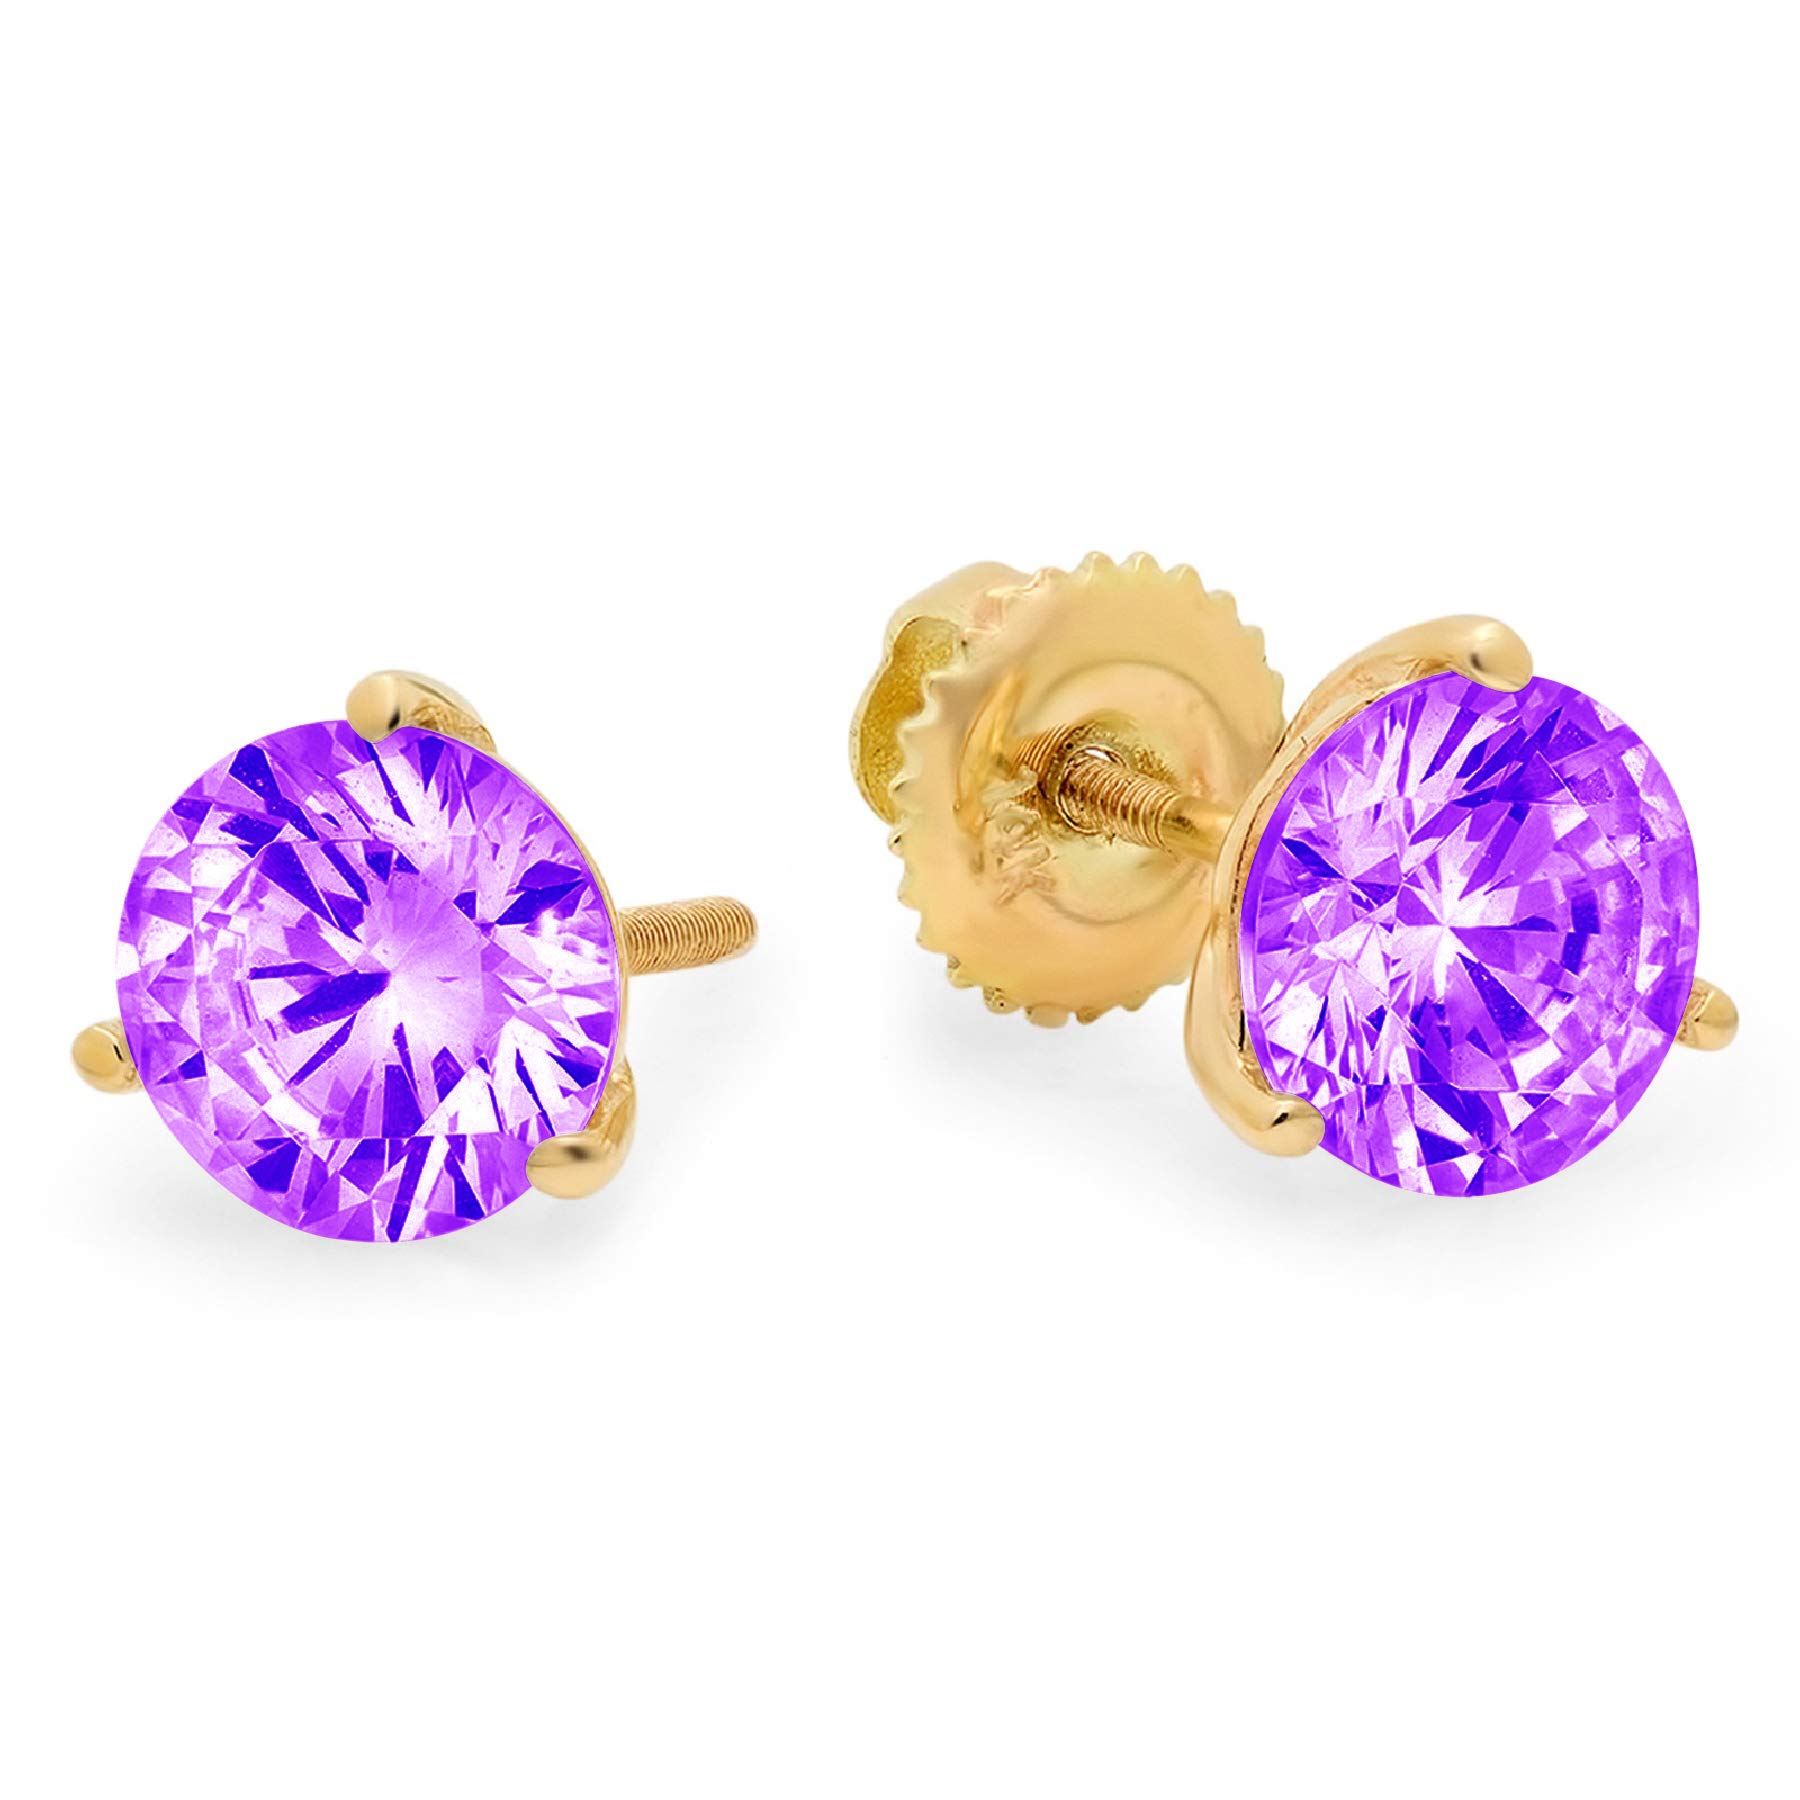 3.9ct Round Cut Solitaire Natural Purple Amethyst gemstone Unisex Designer 3 prong Stud Martini Earrings Solid 14k Yellow Gold Screw Back conflict free Jewelry